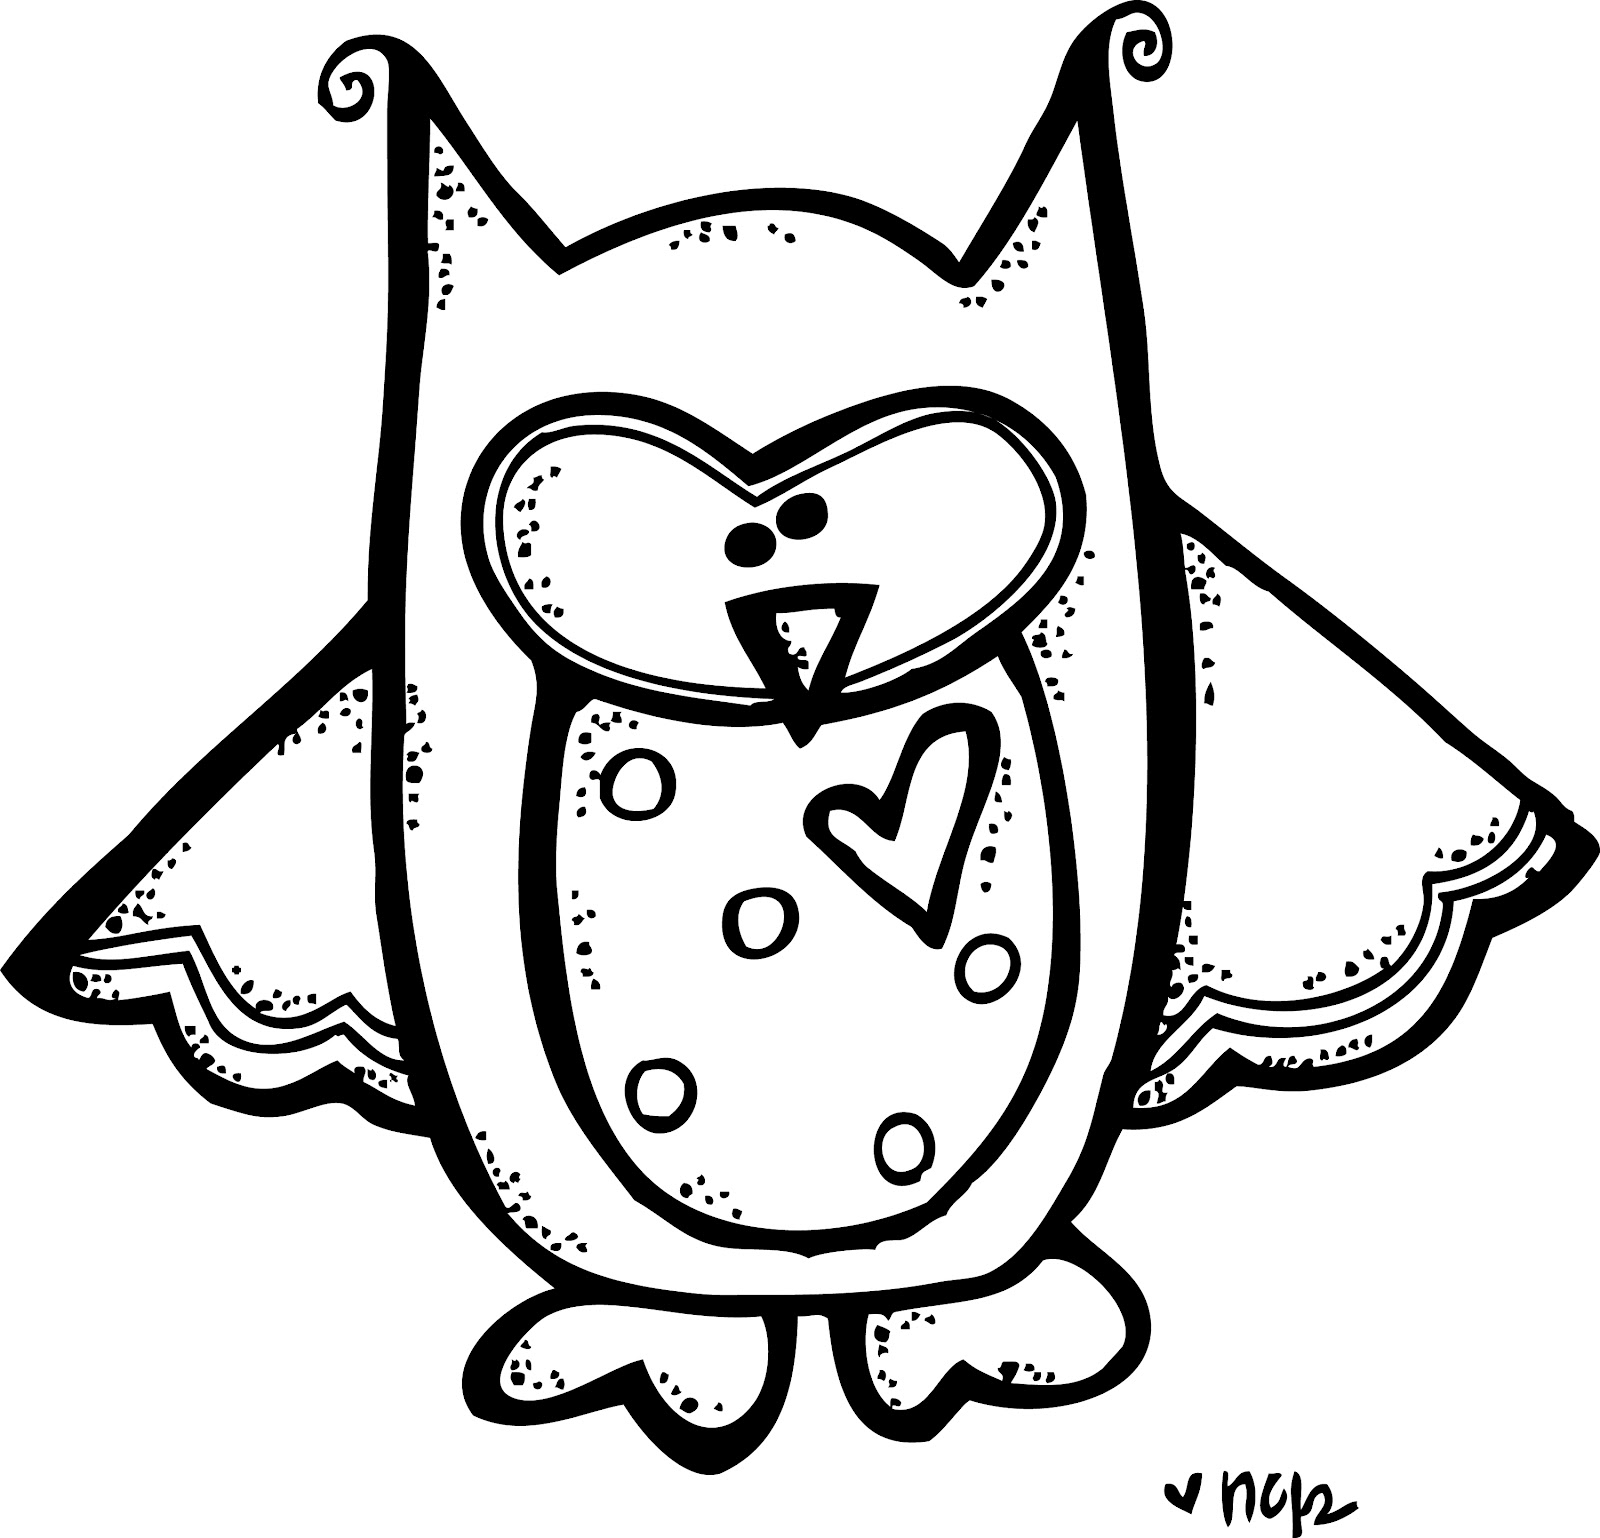 Image of Owl Clipart Black and White #10816, Christmas Clip Art ...